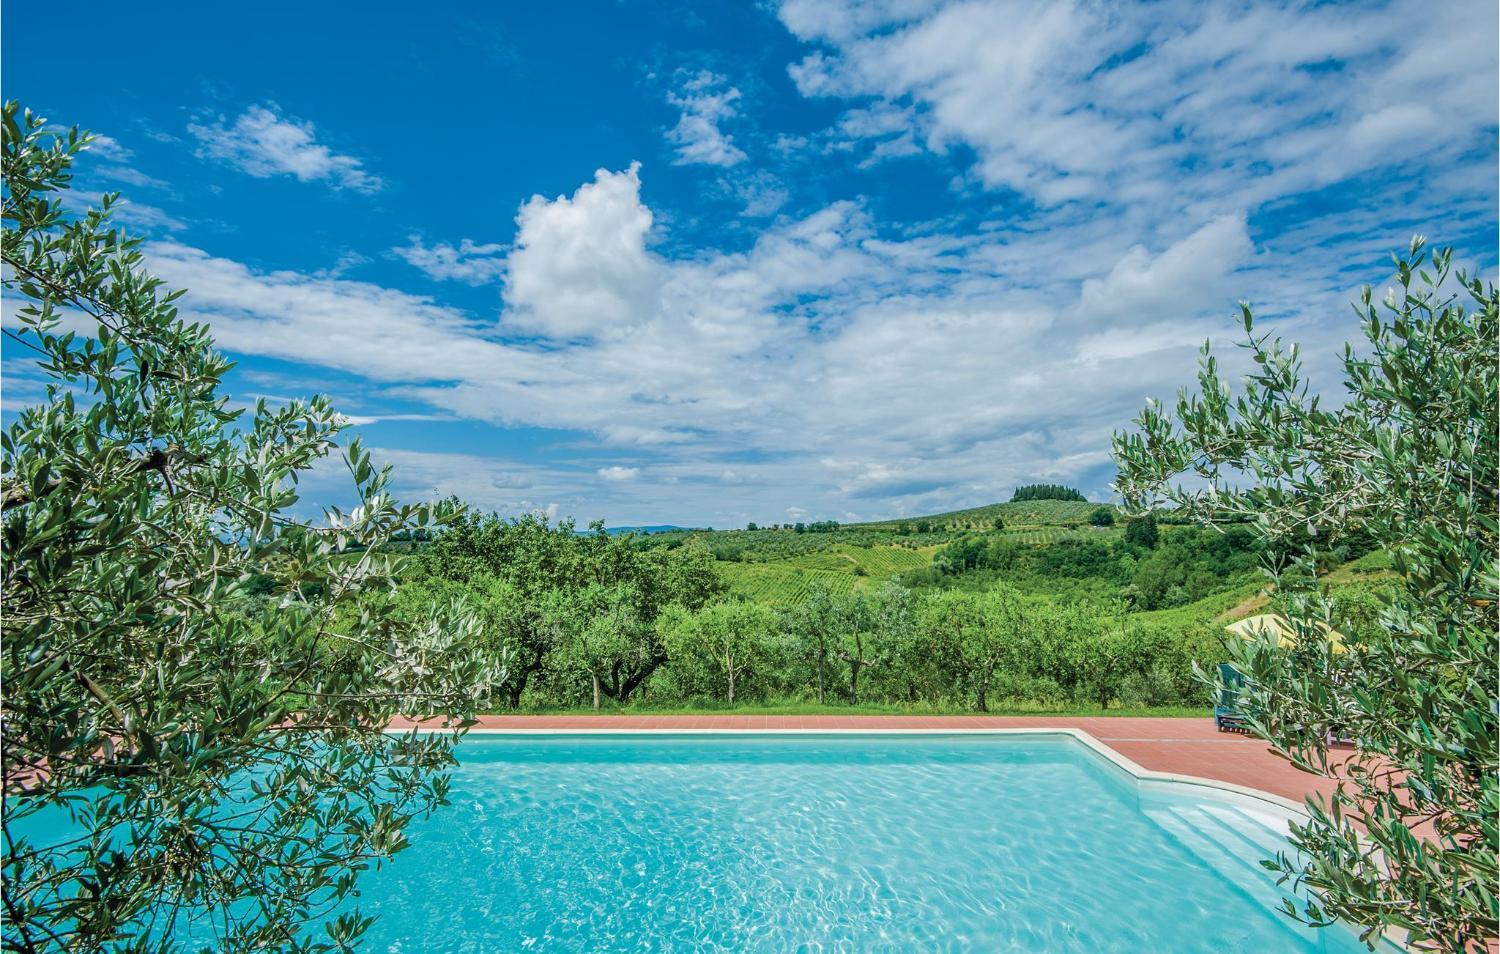 Beautiful Home In Barberino V,elsa fi With 2 Bedrooms, Wifi And Outdoor Swimming Pool, Florence